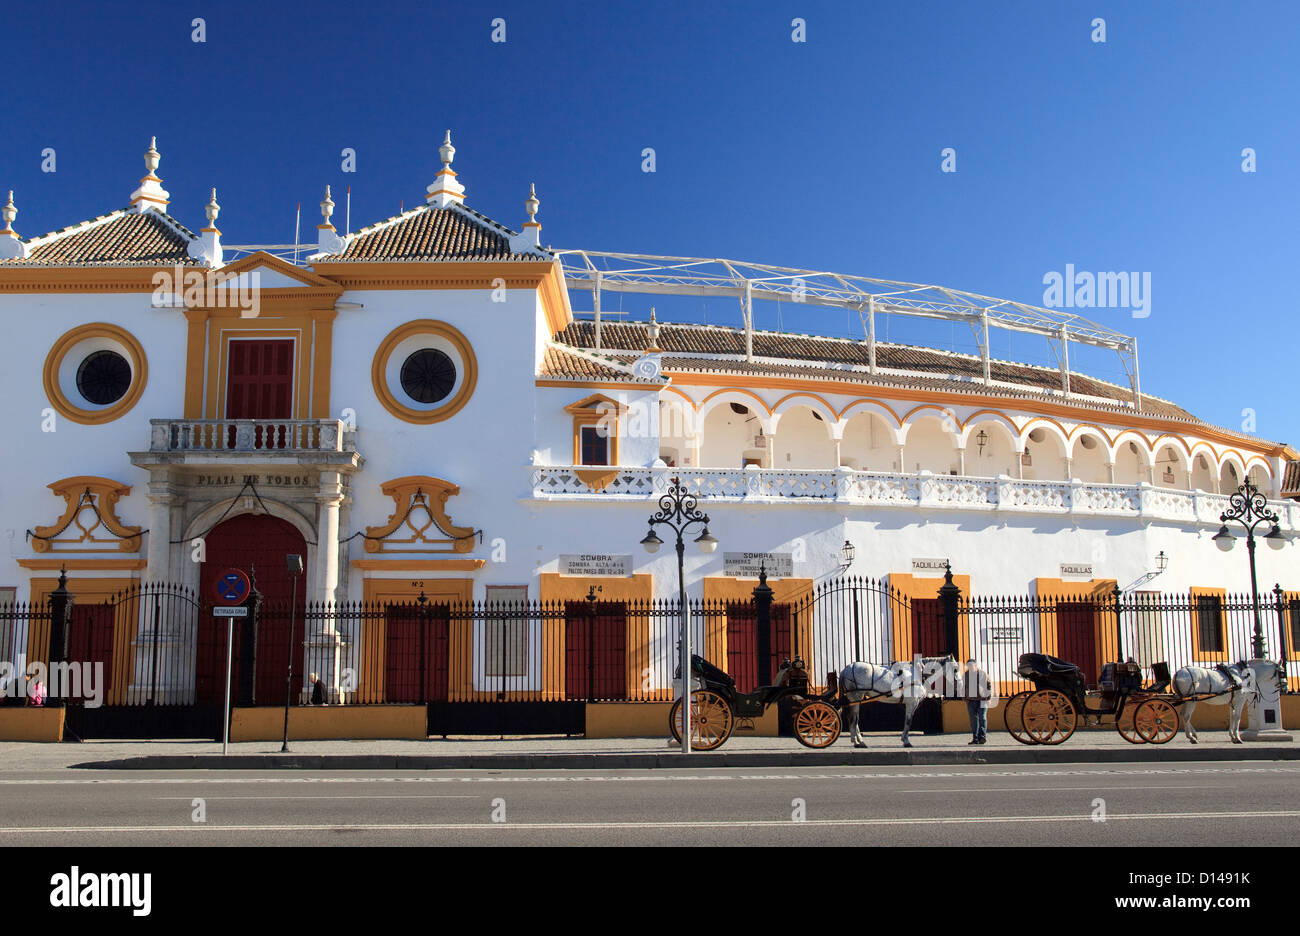 Entrance of the Bull fight arena in Seville, Spain Stock Photo